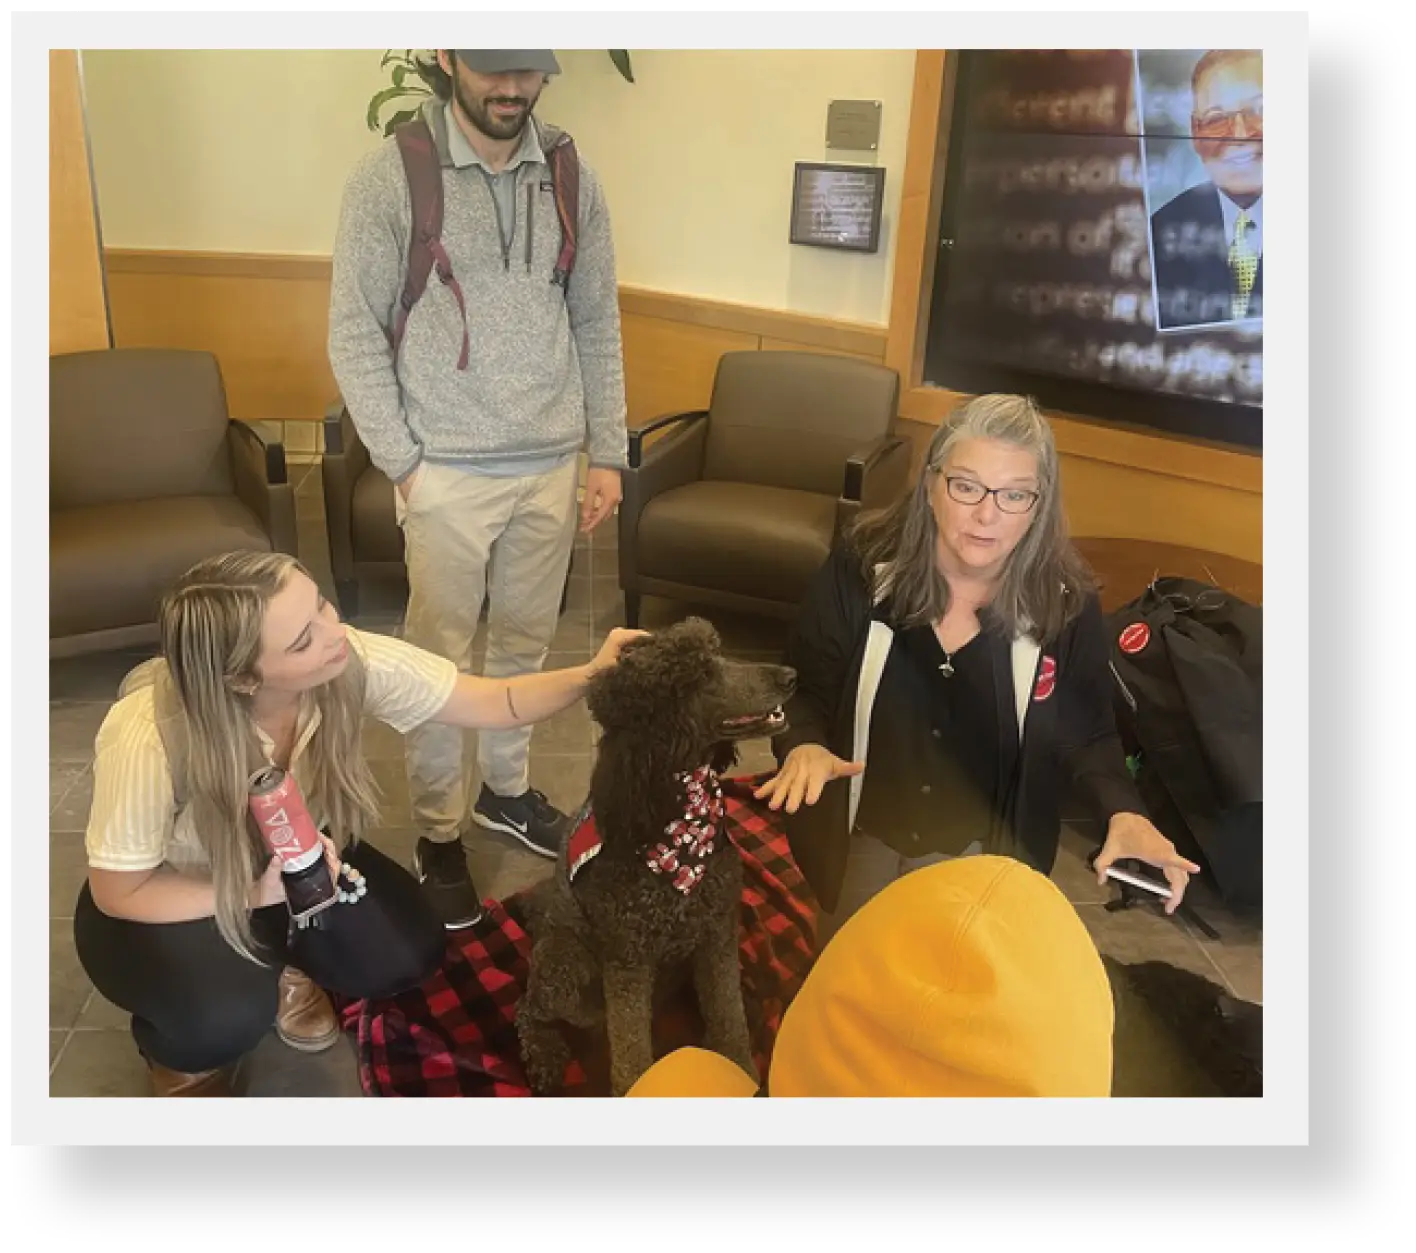 Two students petting black poodle therapy dog and instructor in mid explaination